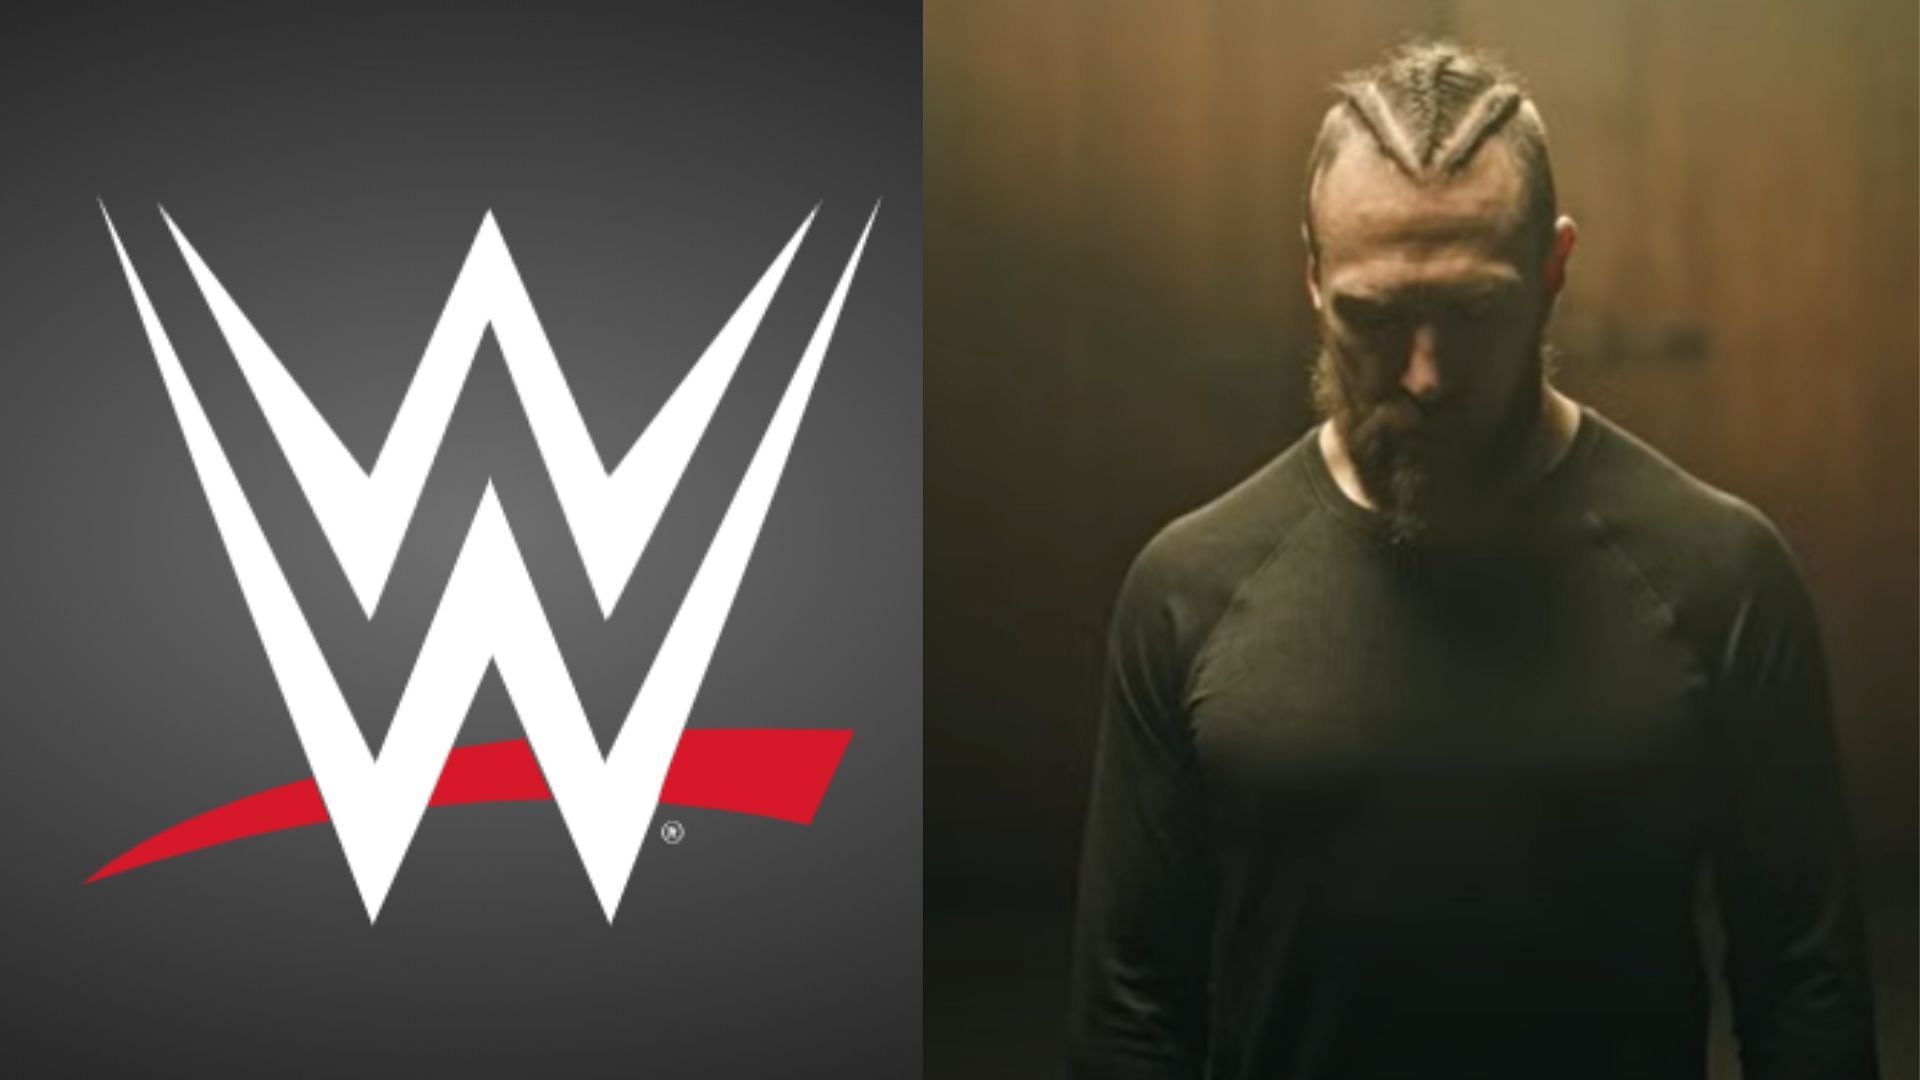 Bryan Danielson joined All Elite Wrestling in 2021 [Image Credits: WWE